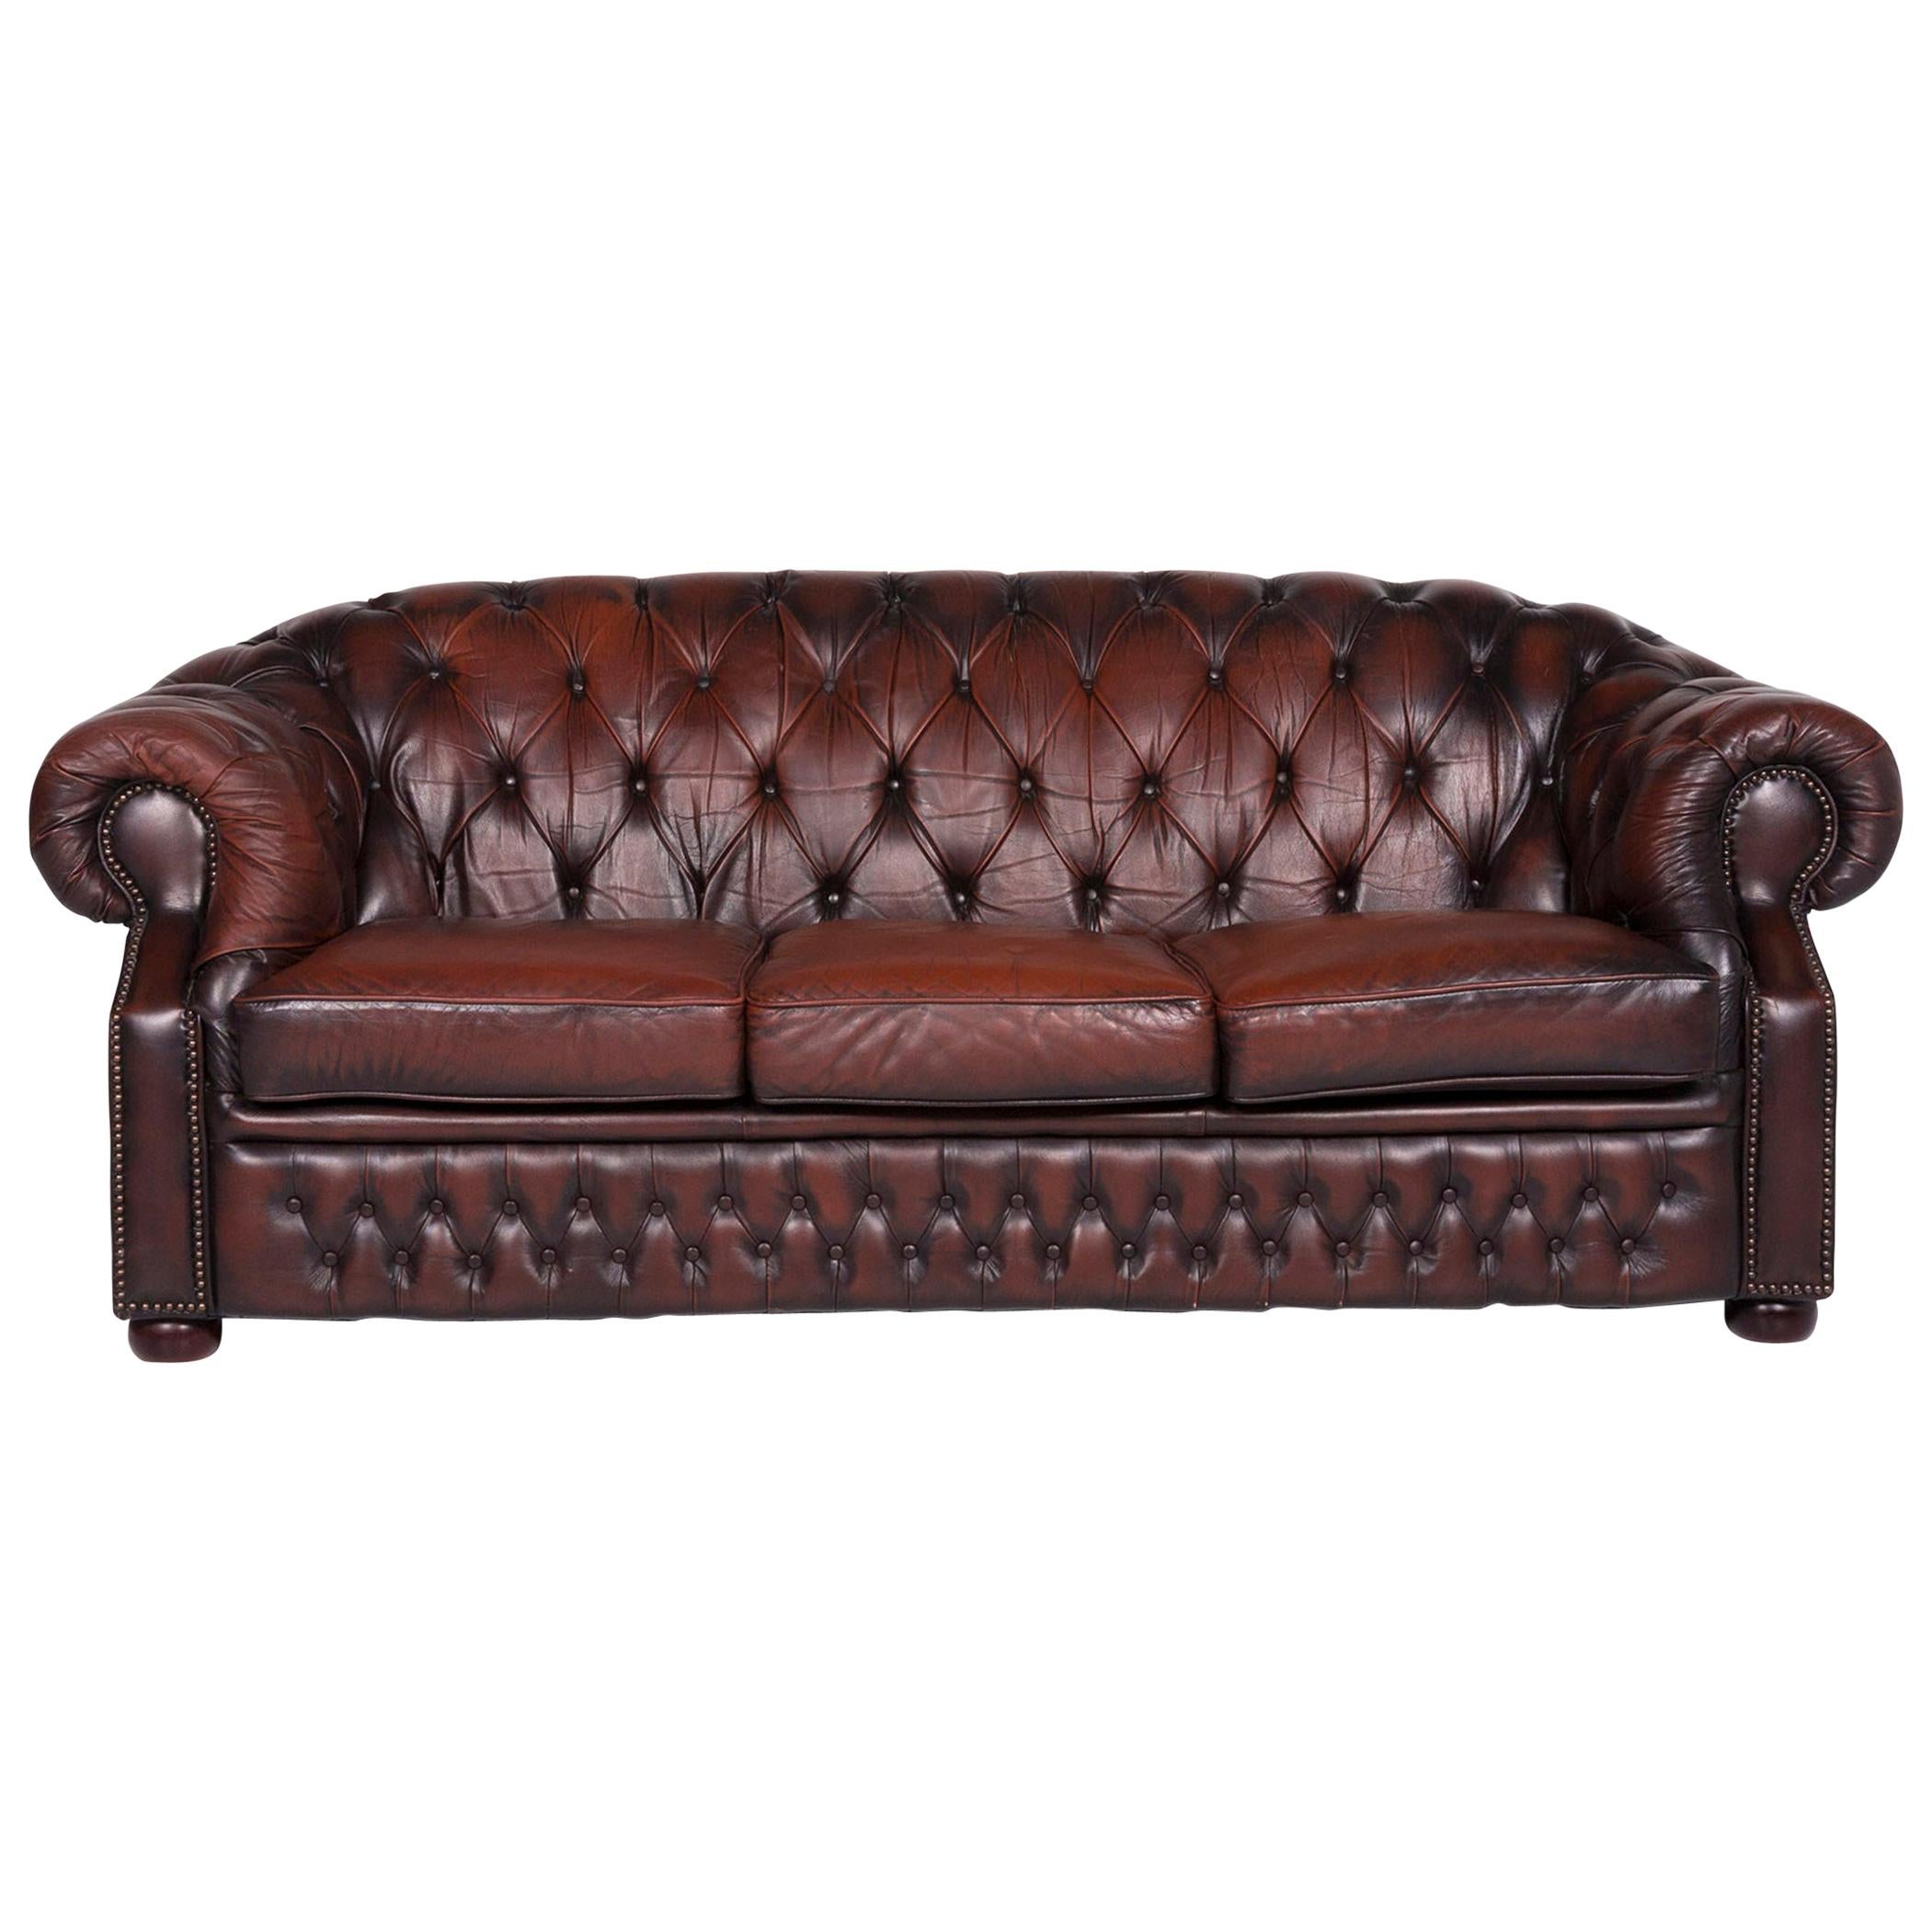 Centurion Leather Sofa Brown Three-Seat Chesterfield